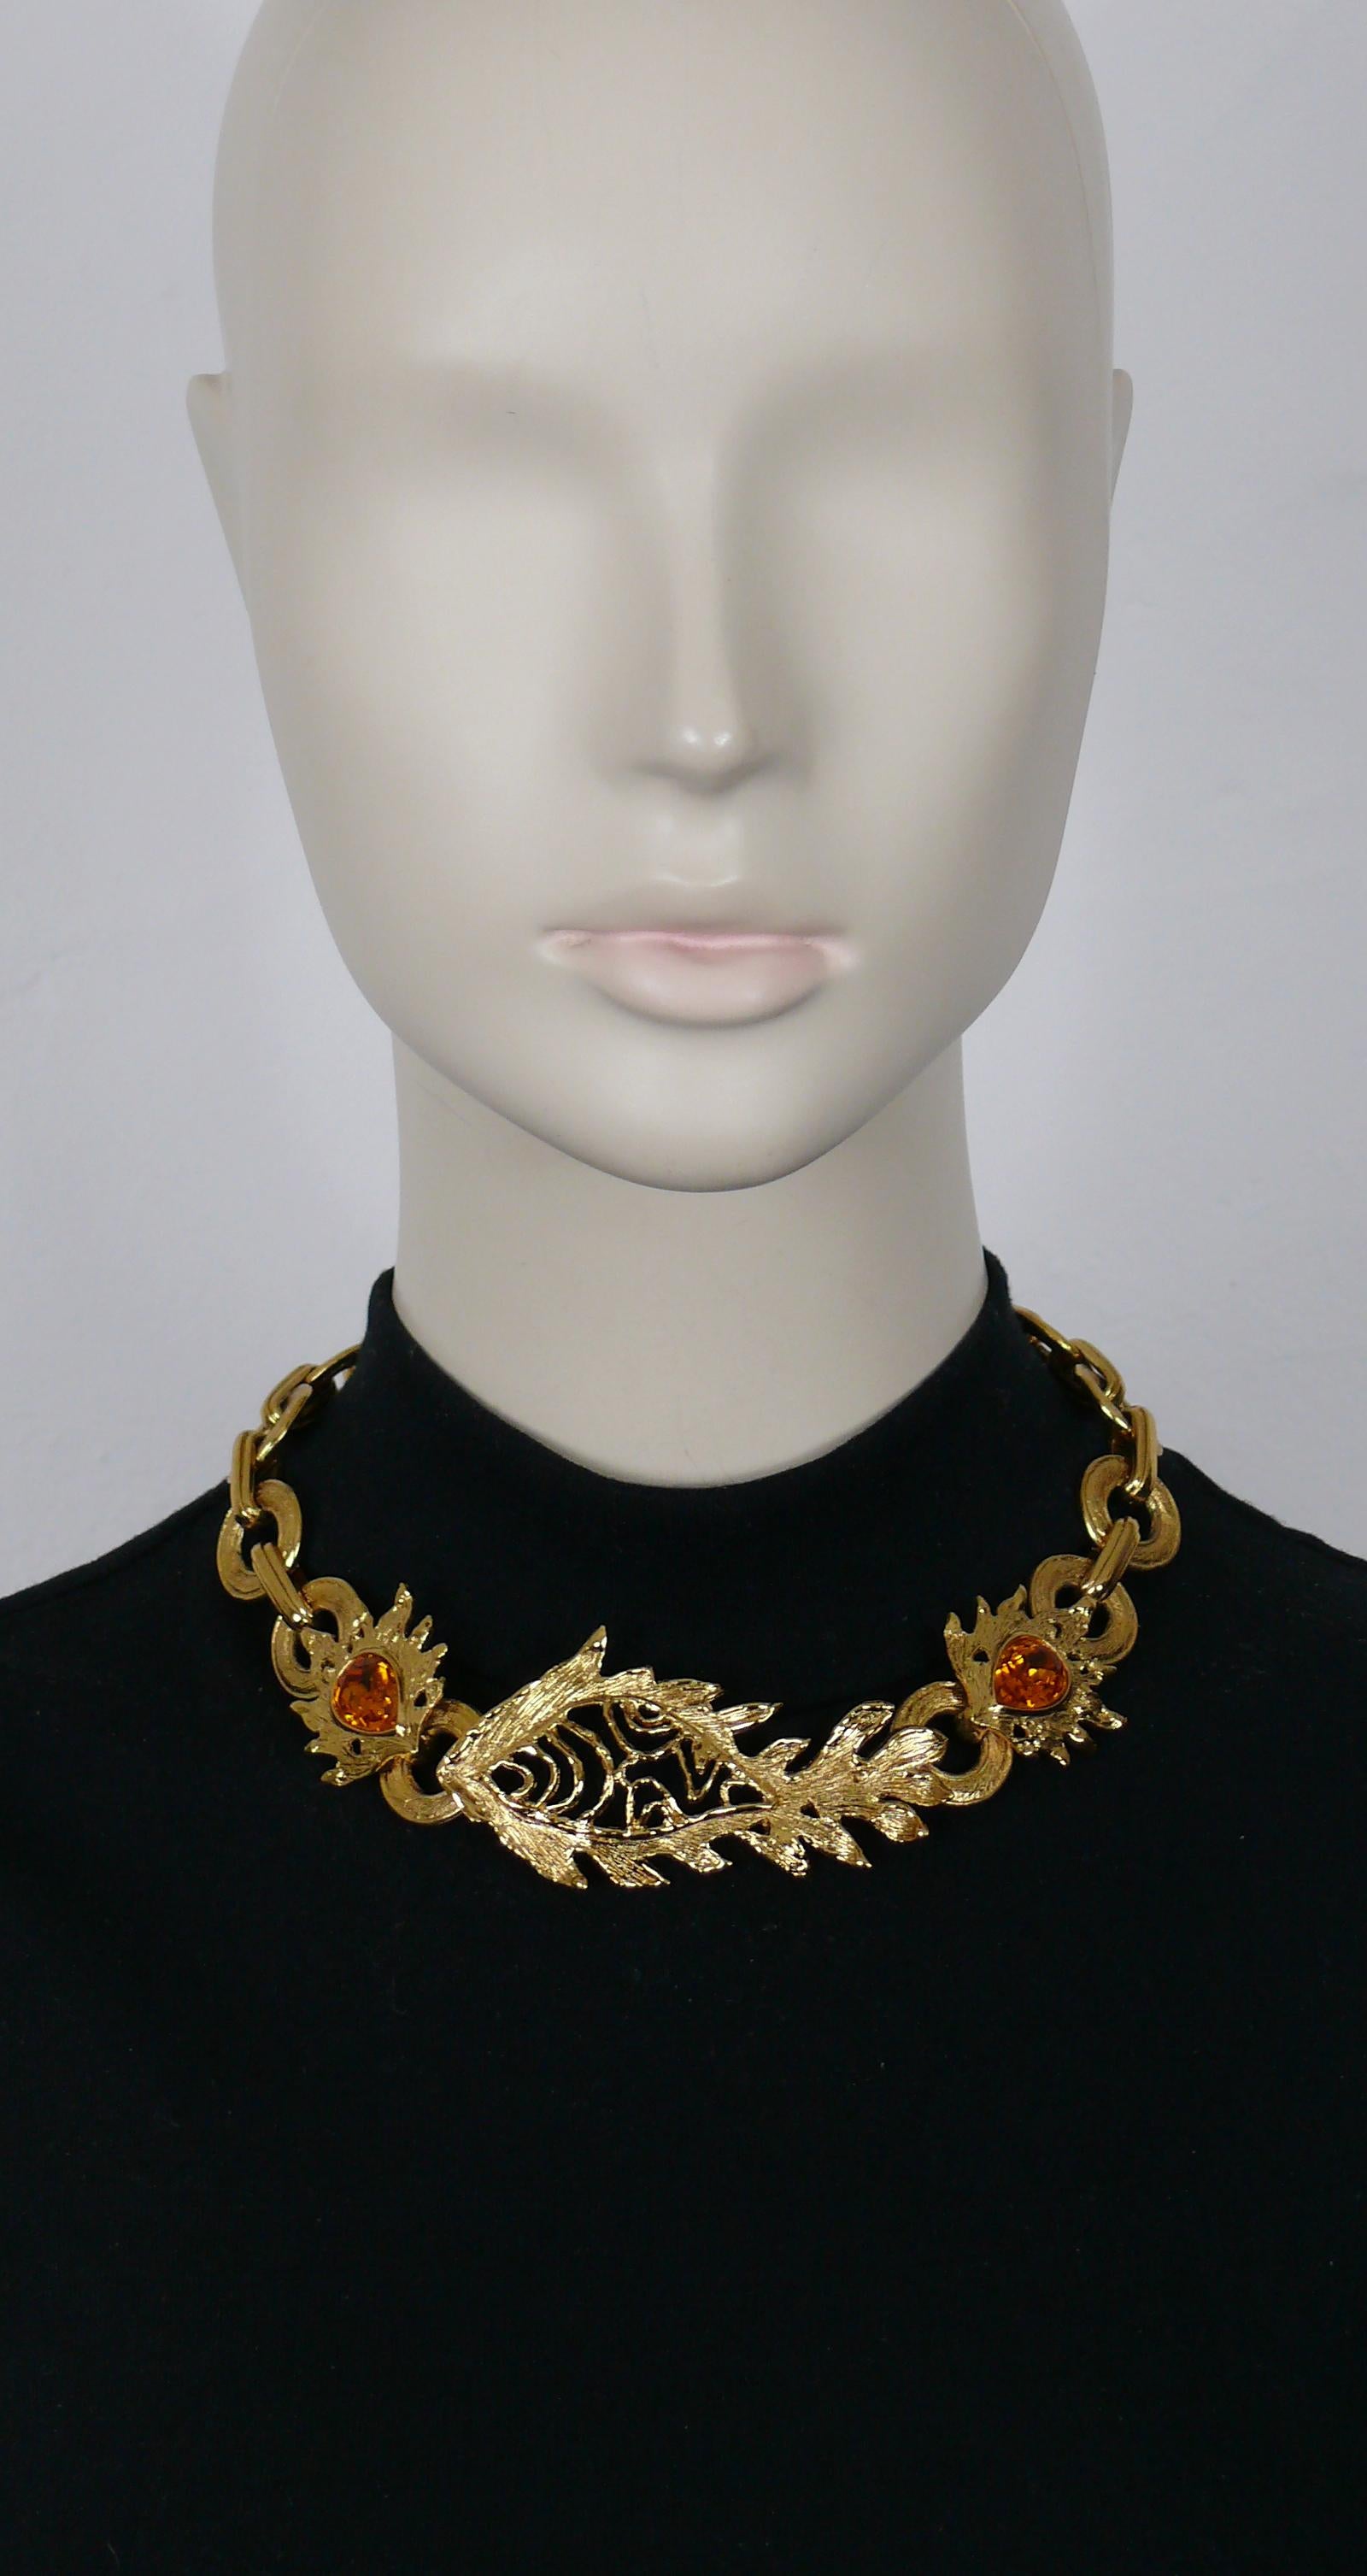 YVES SAINT LAURENT vintage gold tone necklace featuring an openwork fish centerpiece adorned with two large faceted pear-shape topaze color crystals.

Adjustable T-bar closure and love hearts toggles.

Cursive signature YVES SAINT LAURENT embossed